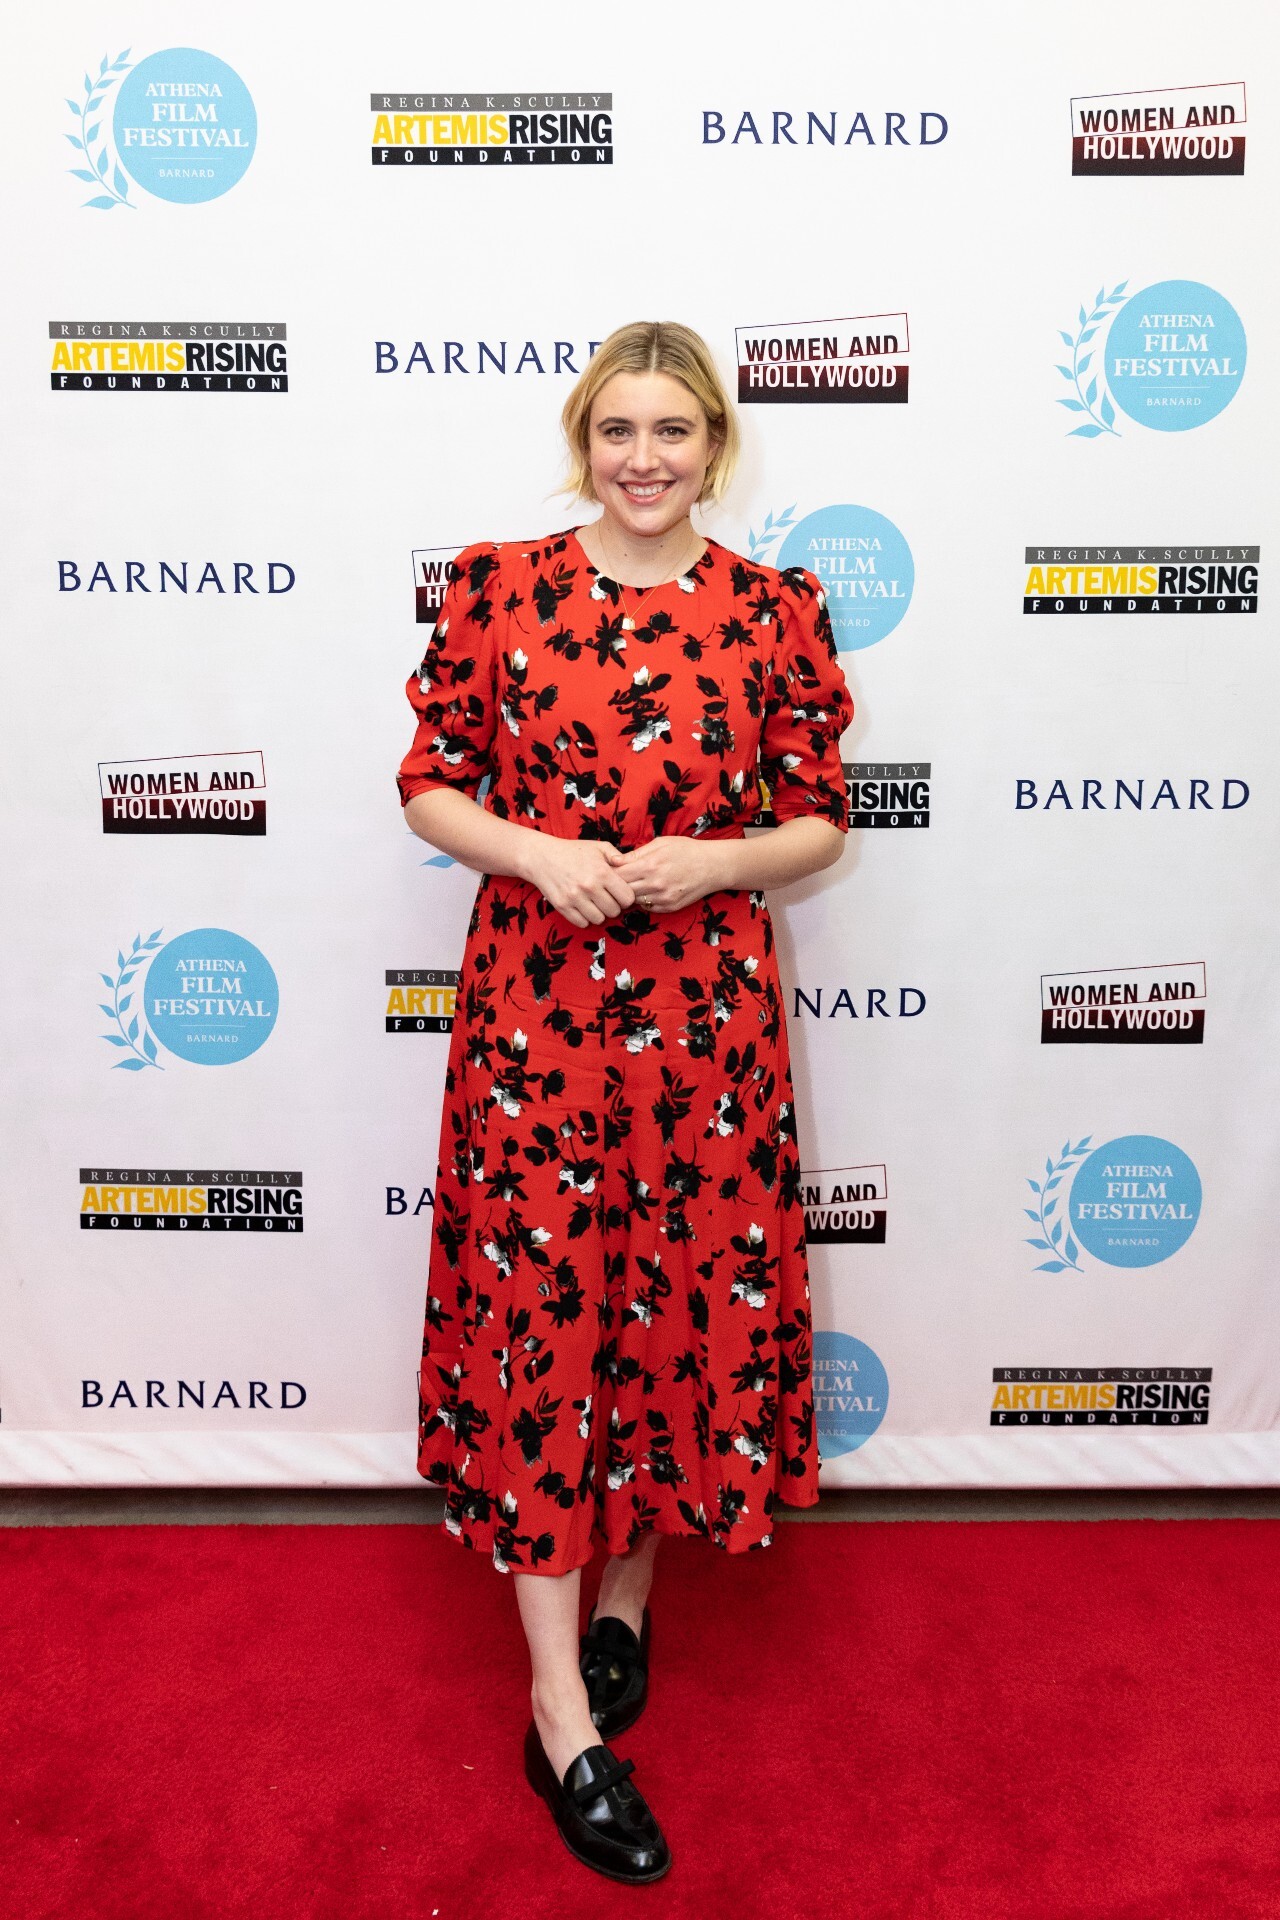 Greta Gerwig on the red carpet of the Athena Film Festival in 2020 — Gerwig stands against a photo backdrop with logos for Barnard and the film fest